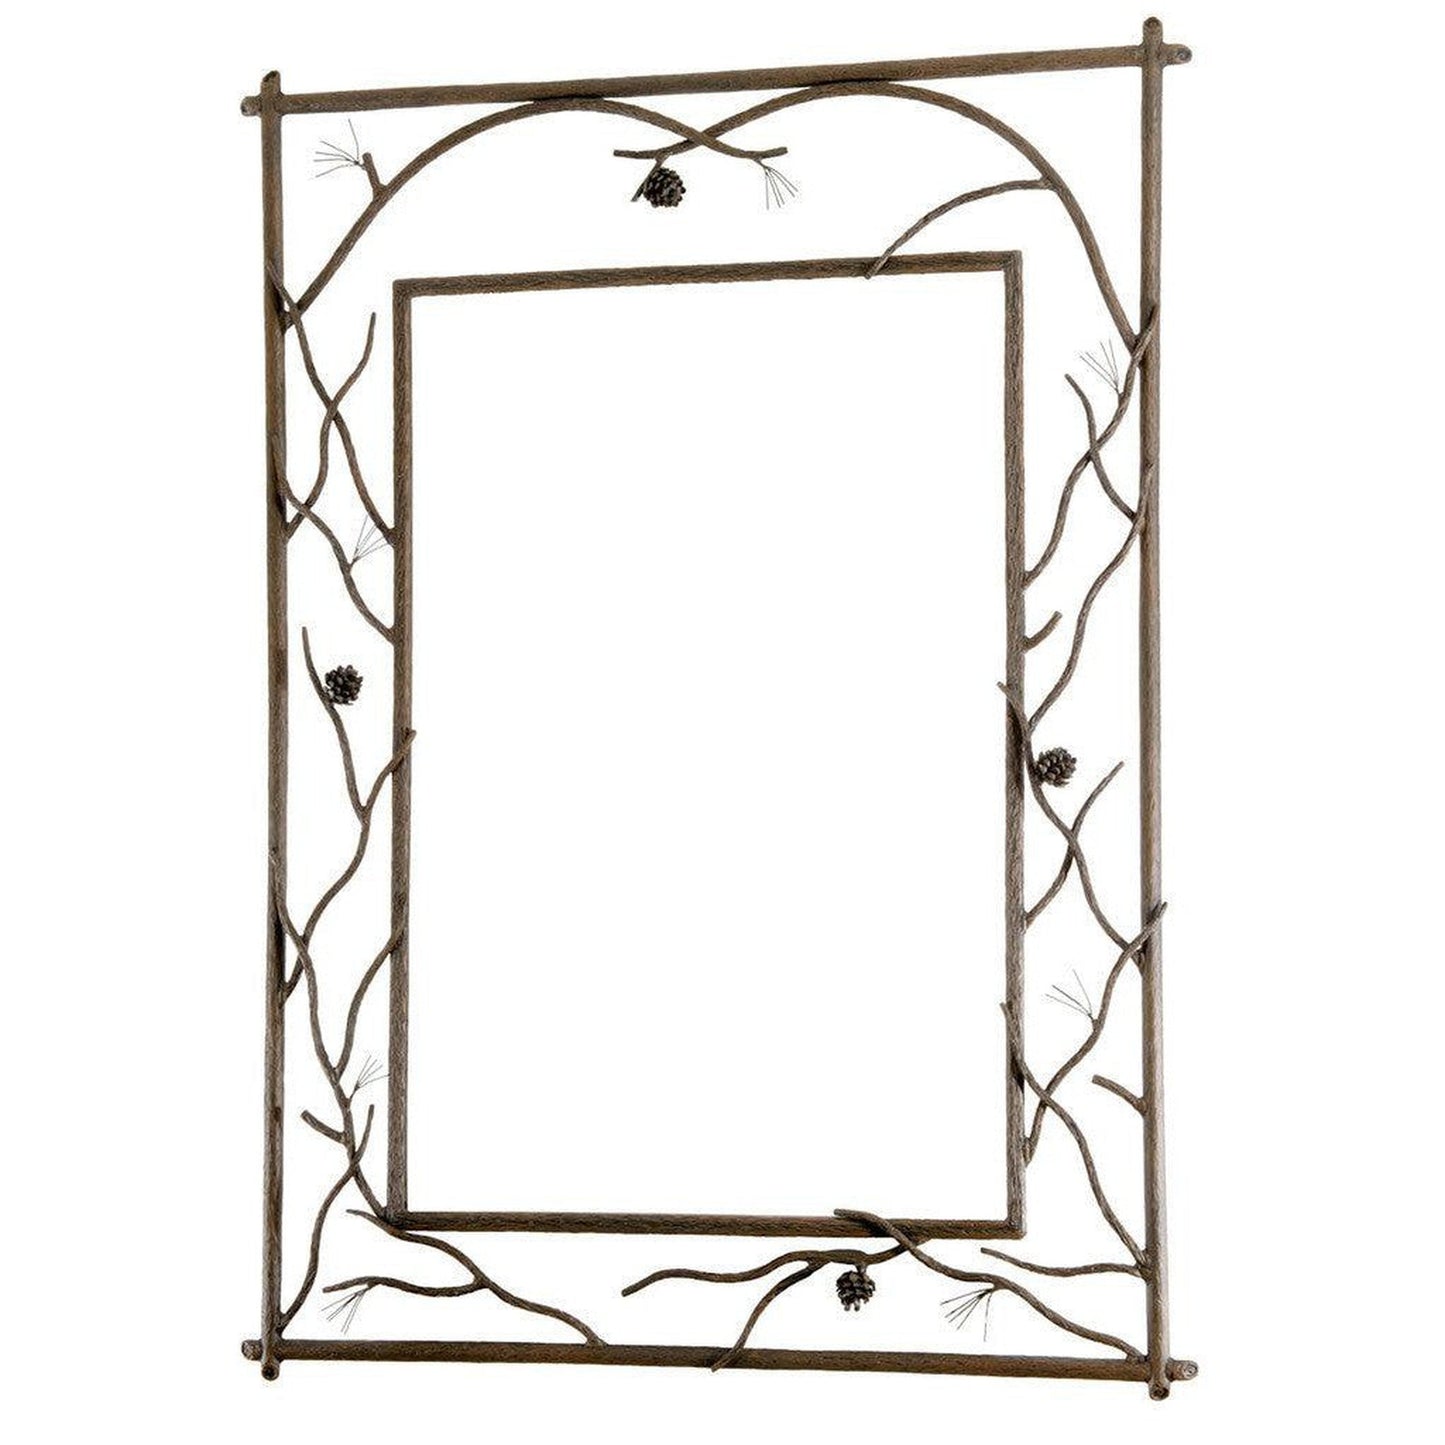 Stone County Ironworks Pine 37" x 51" Large Natural Bark Branched Iron Wall Mirror With Pewter Iron Accent